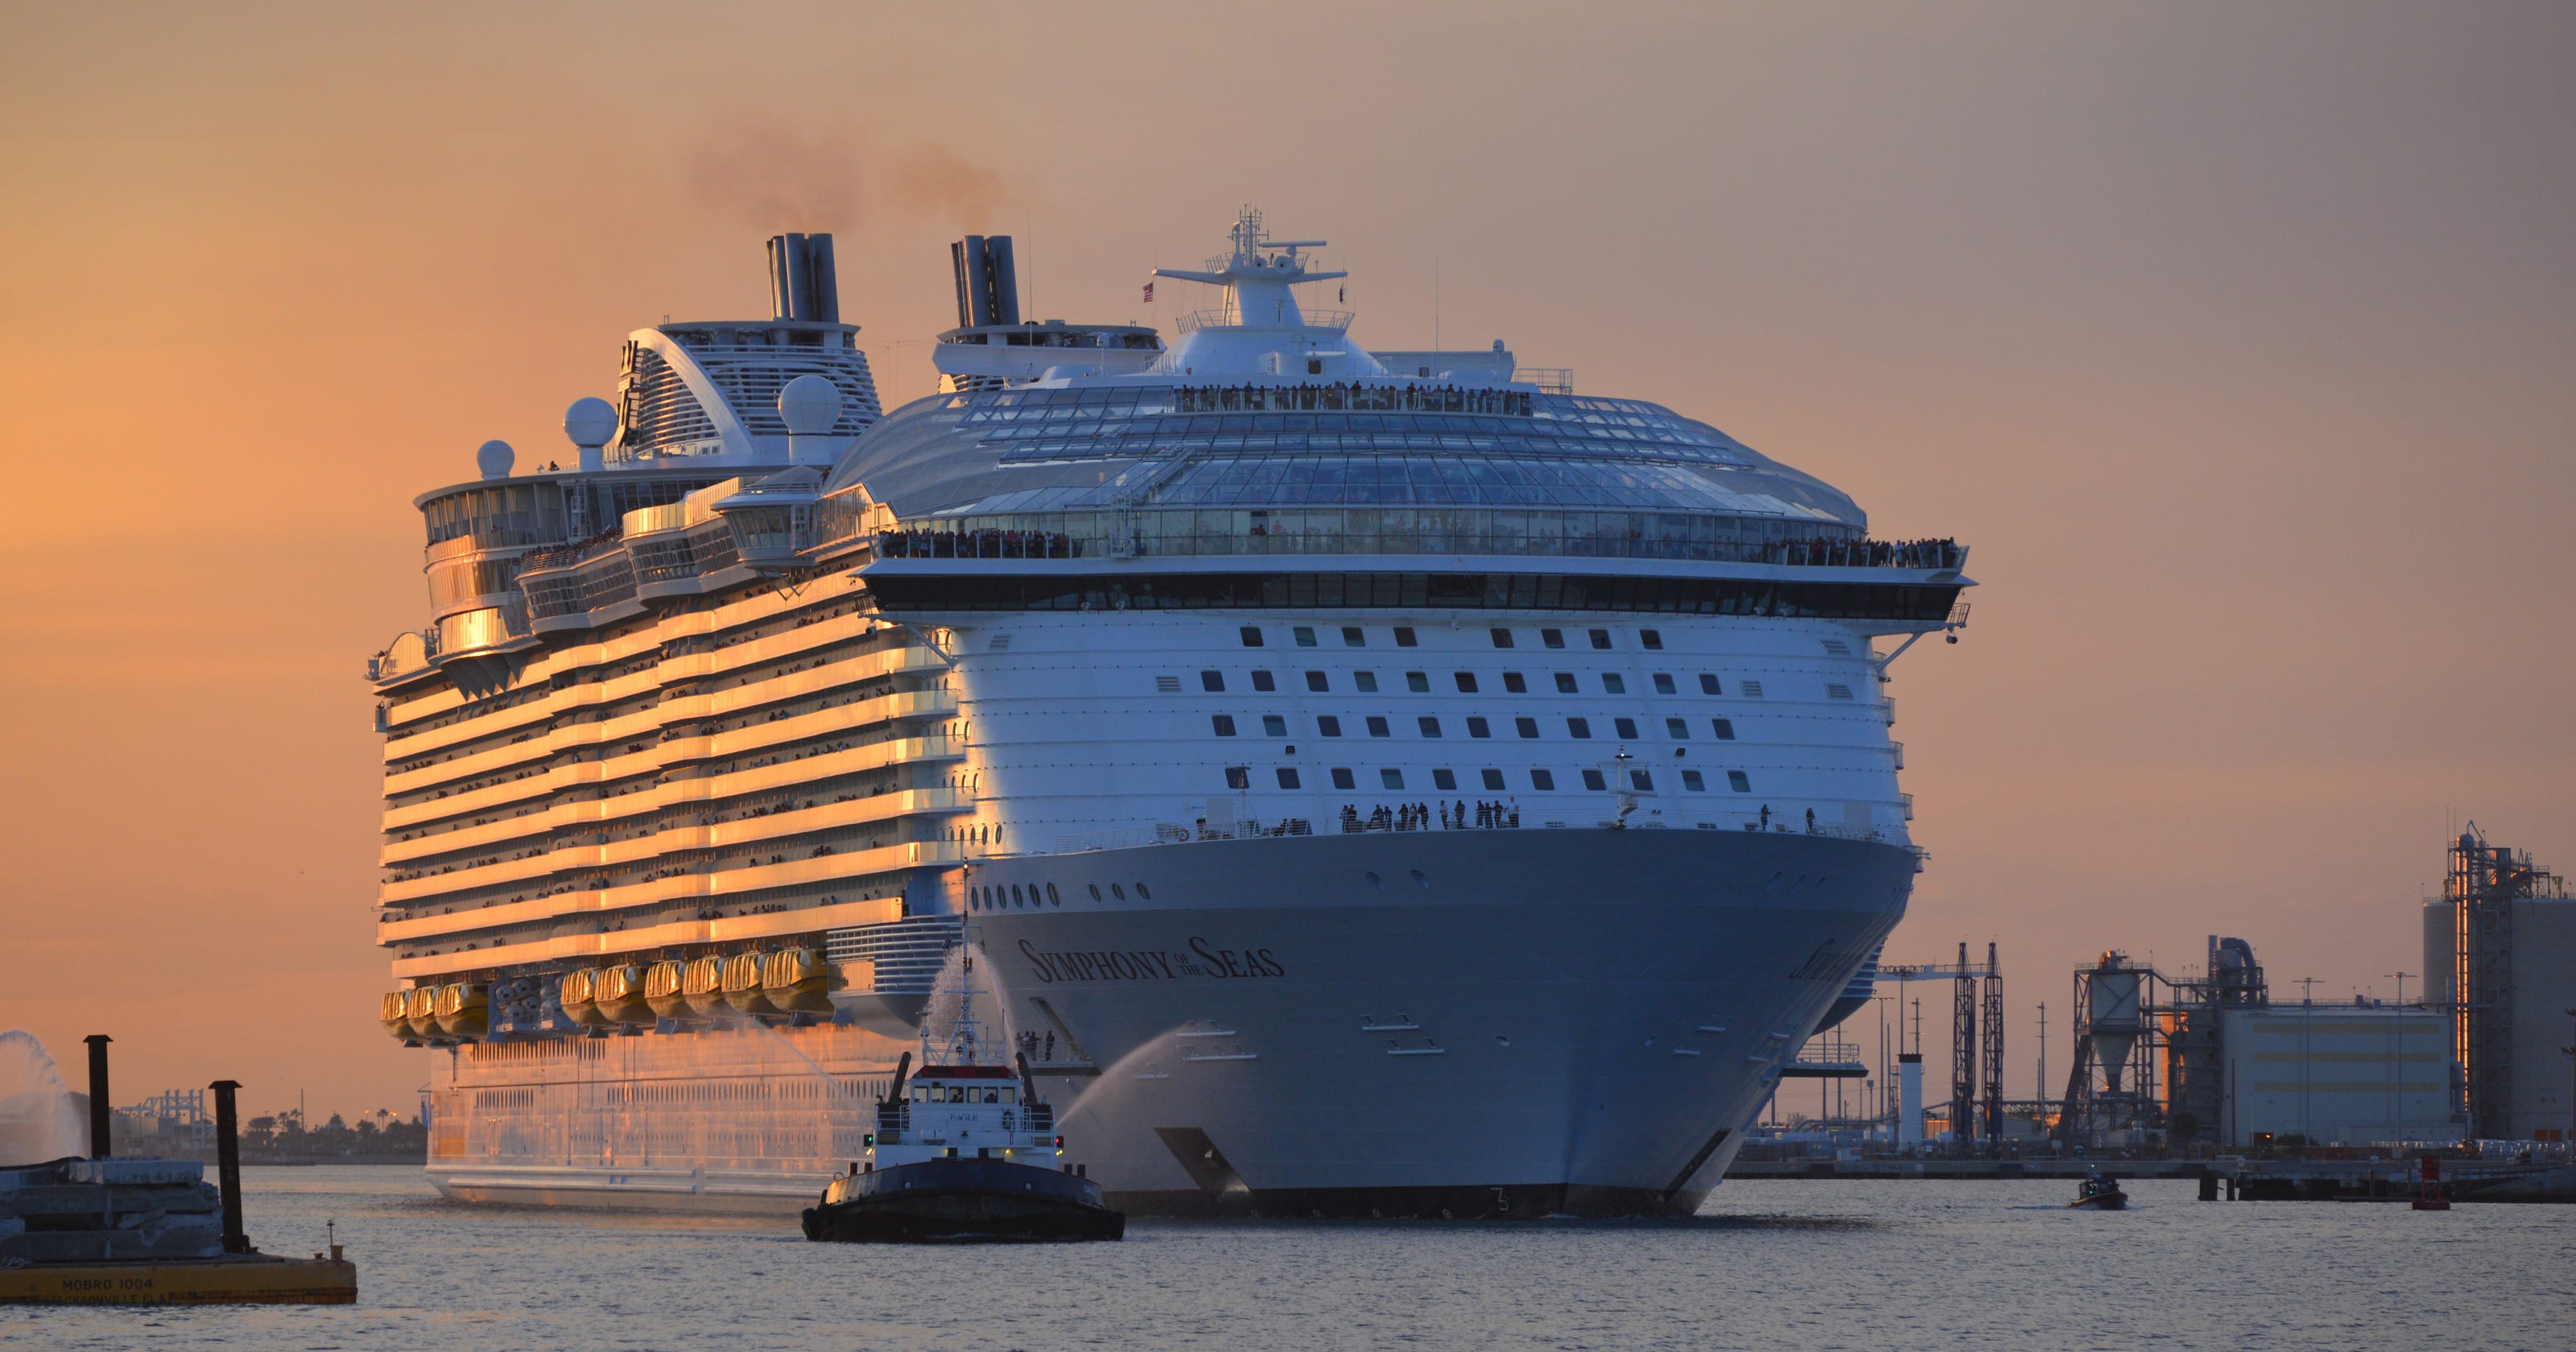 Symphony of the Seas: Royal Caribbean's giant new cruise ship in video